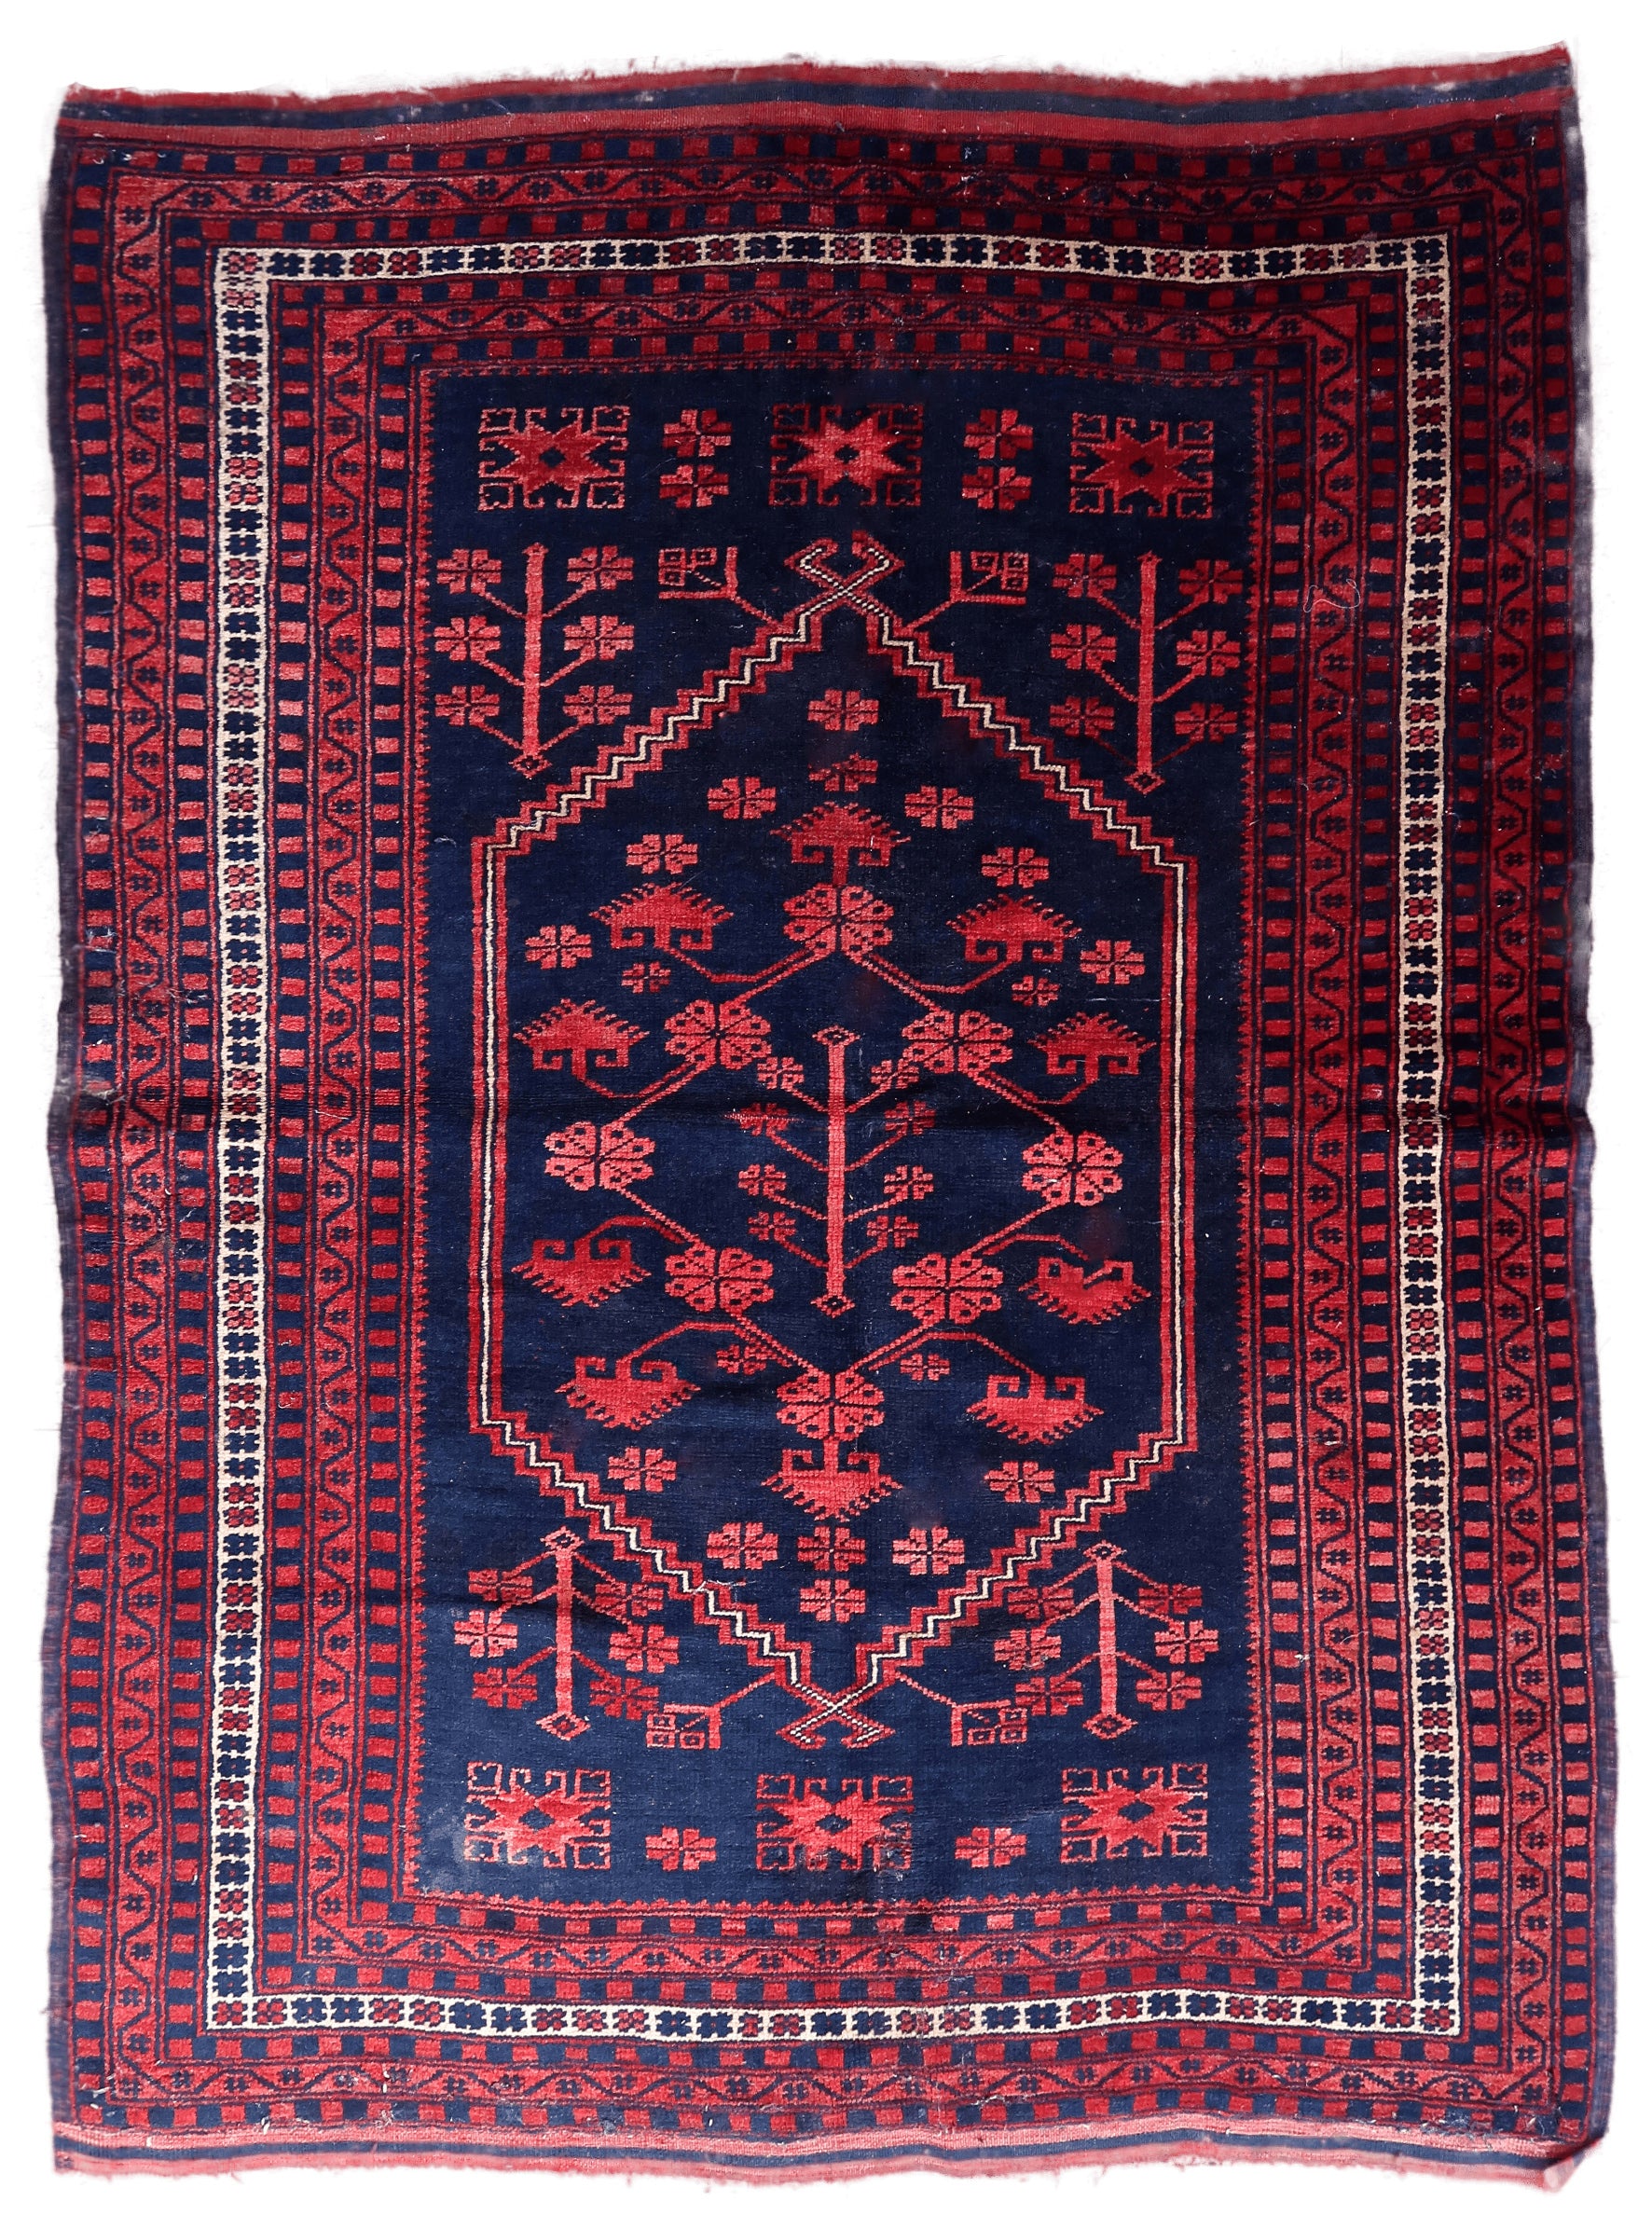 Vintage Caucasian Karabagh Rug, 1940s - Front View - Navy Blue, Red, and Beige Colors